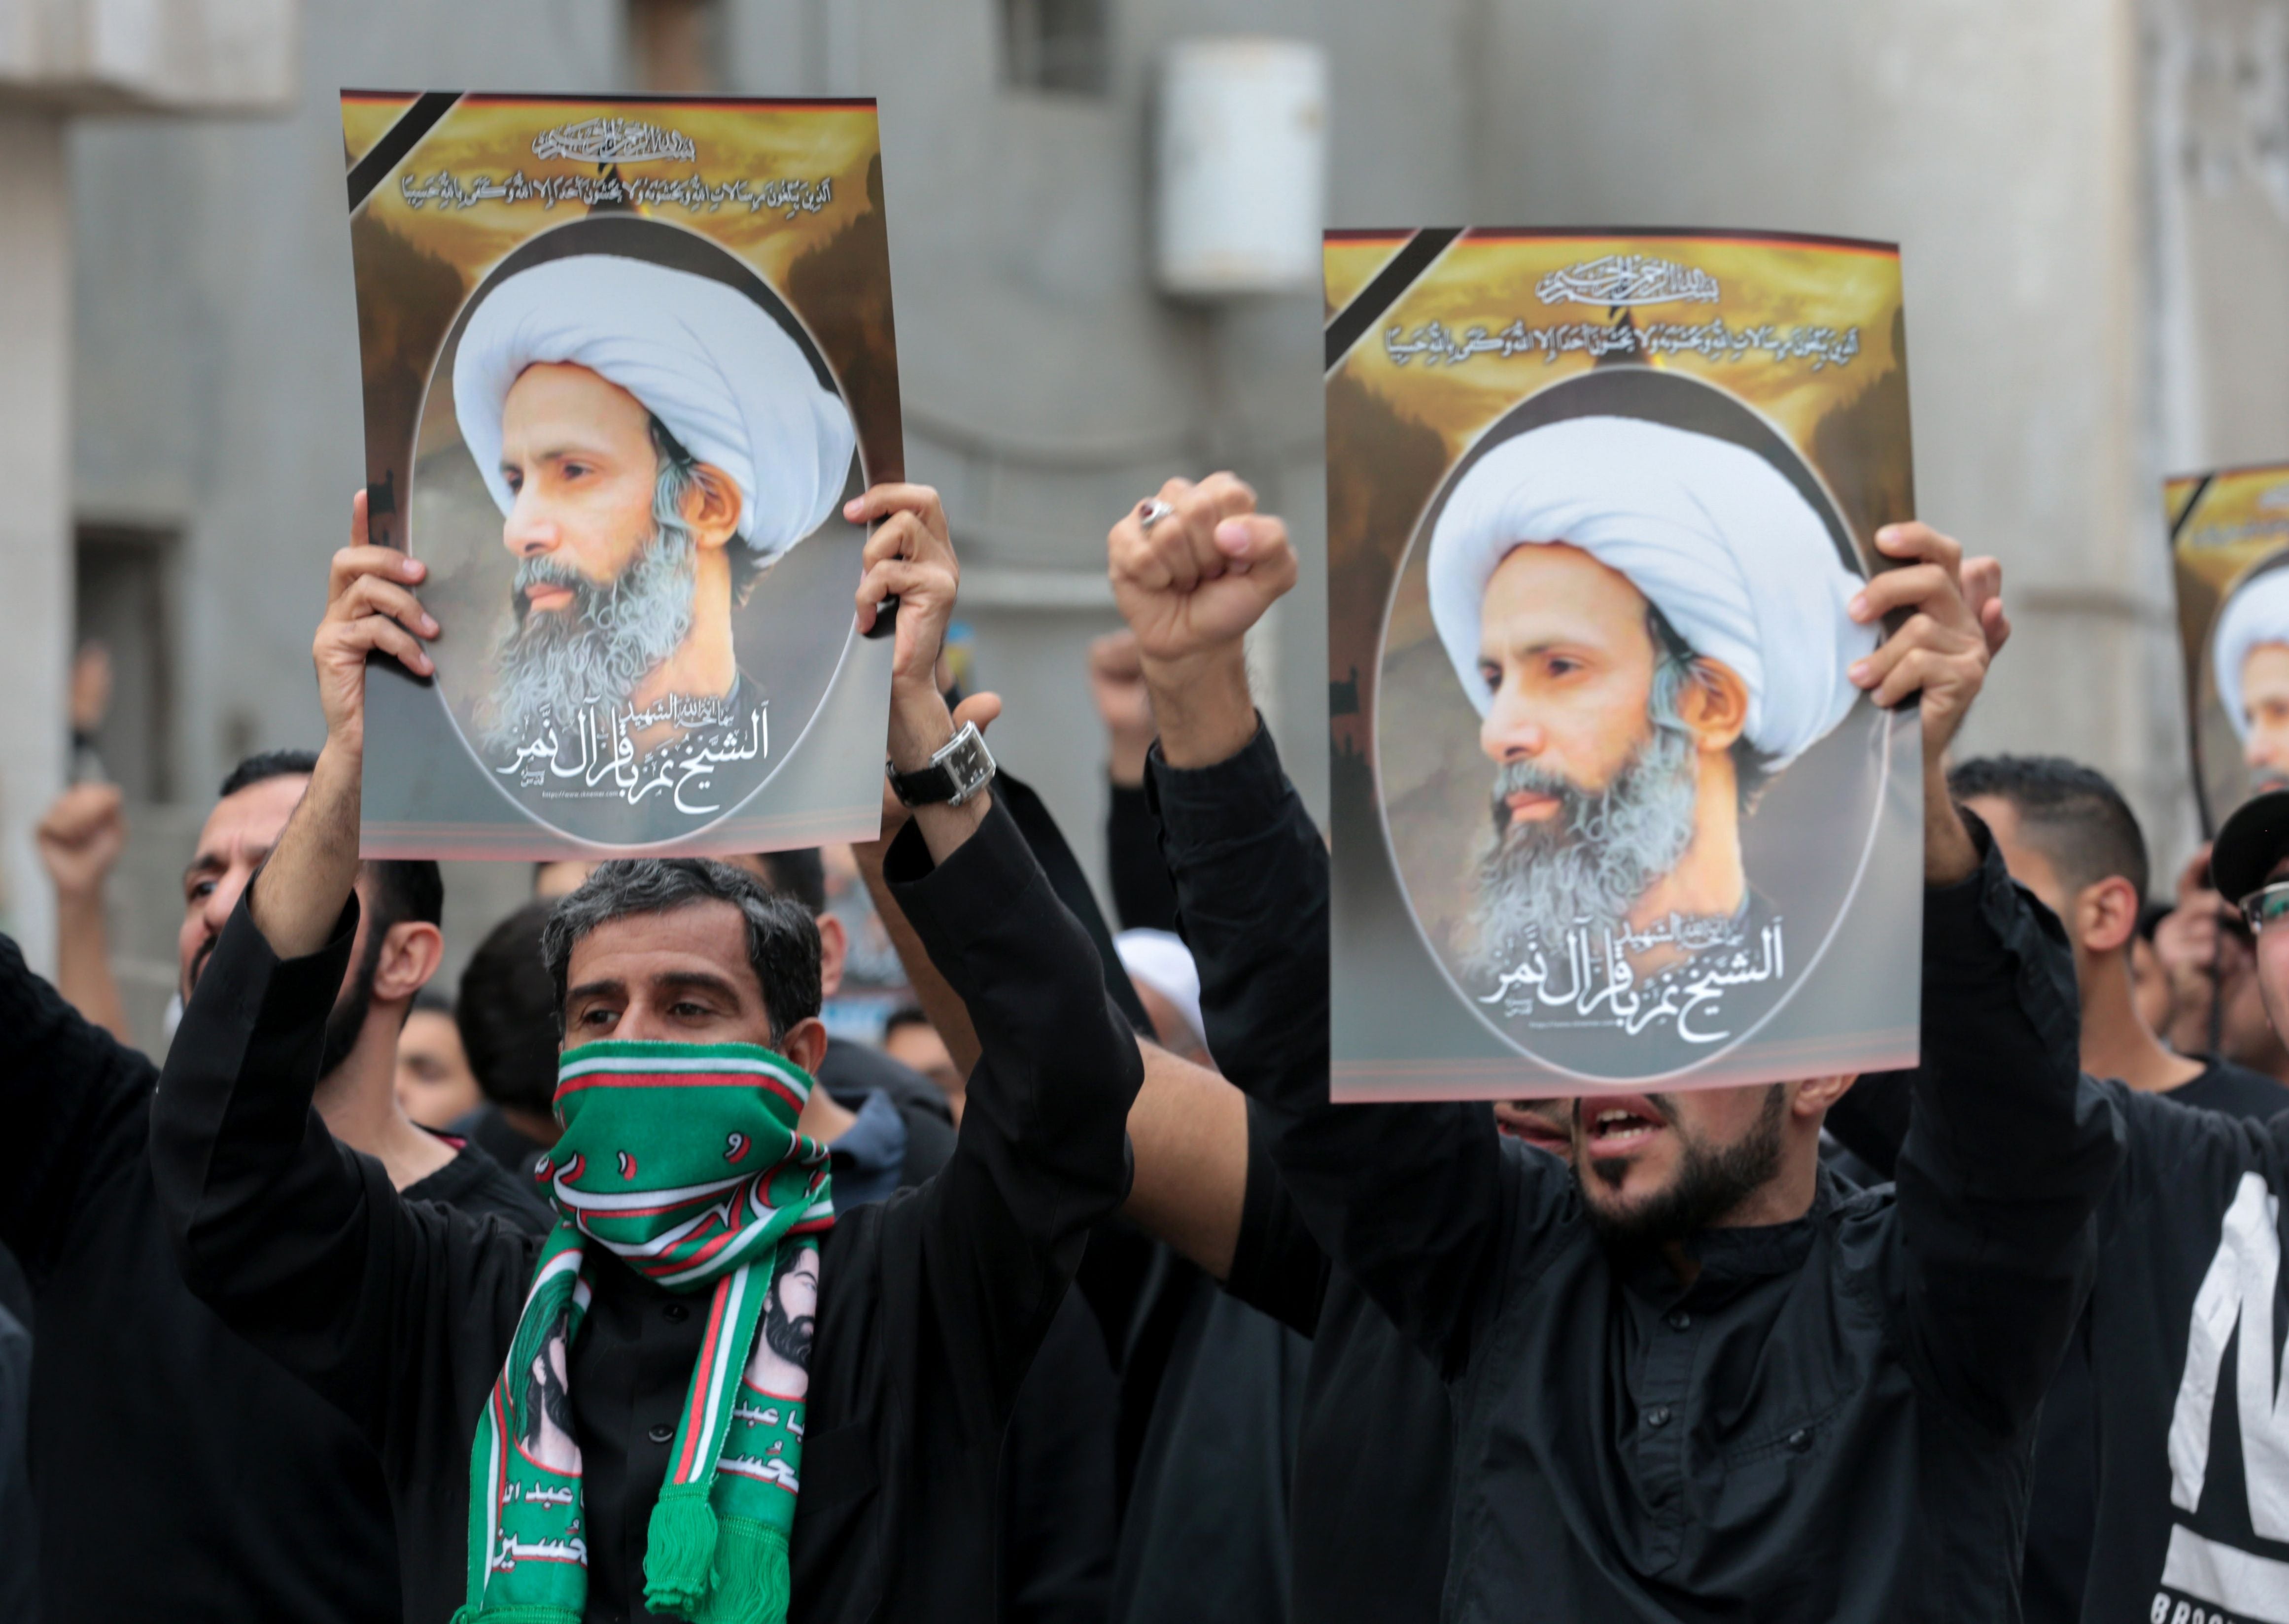 Men hold placards bearing portraits of a prominent Shia Muslim cleric, Nimr al-Nimr, whose execution sparked demonstrations in 2016 by the country's minority Shia citizens against systematic governmental discrimination. Some of the alleged child offenders currently on trial were accused of attending similar protests. 